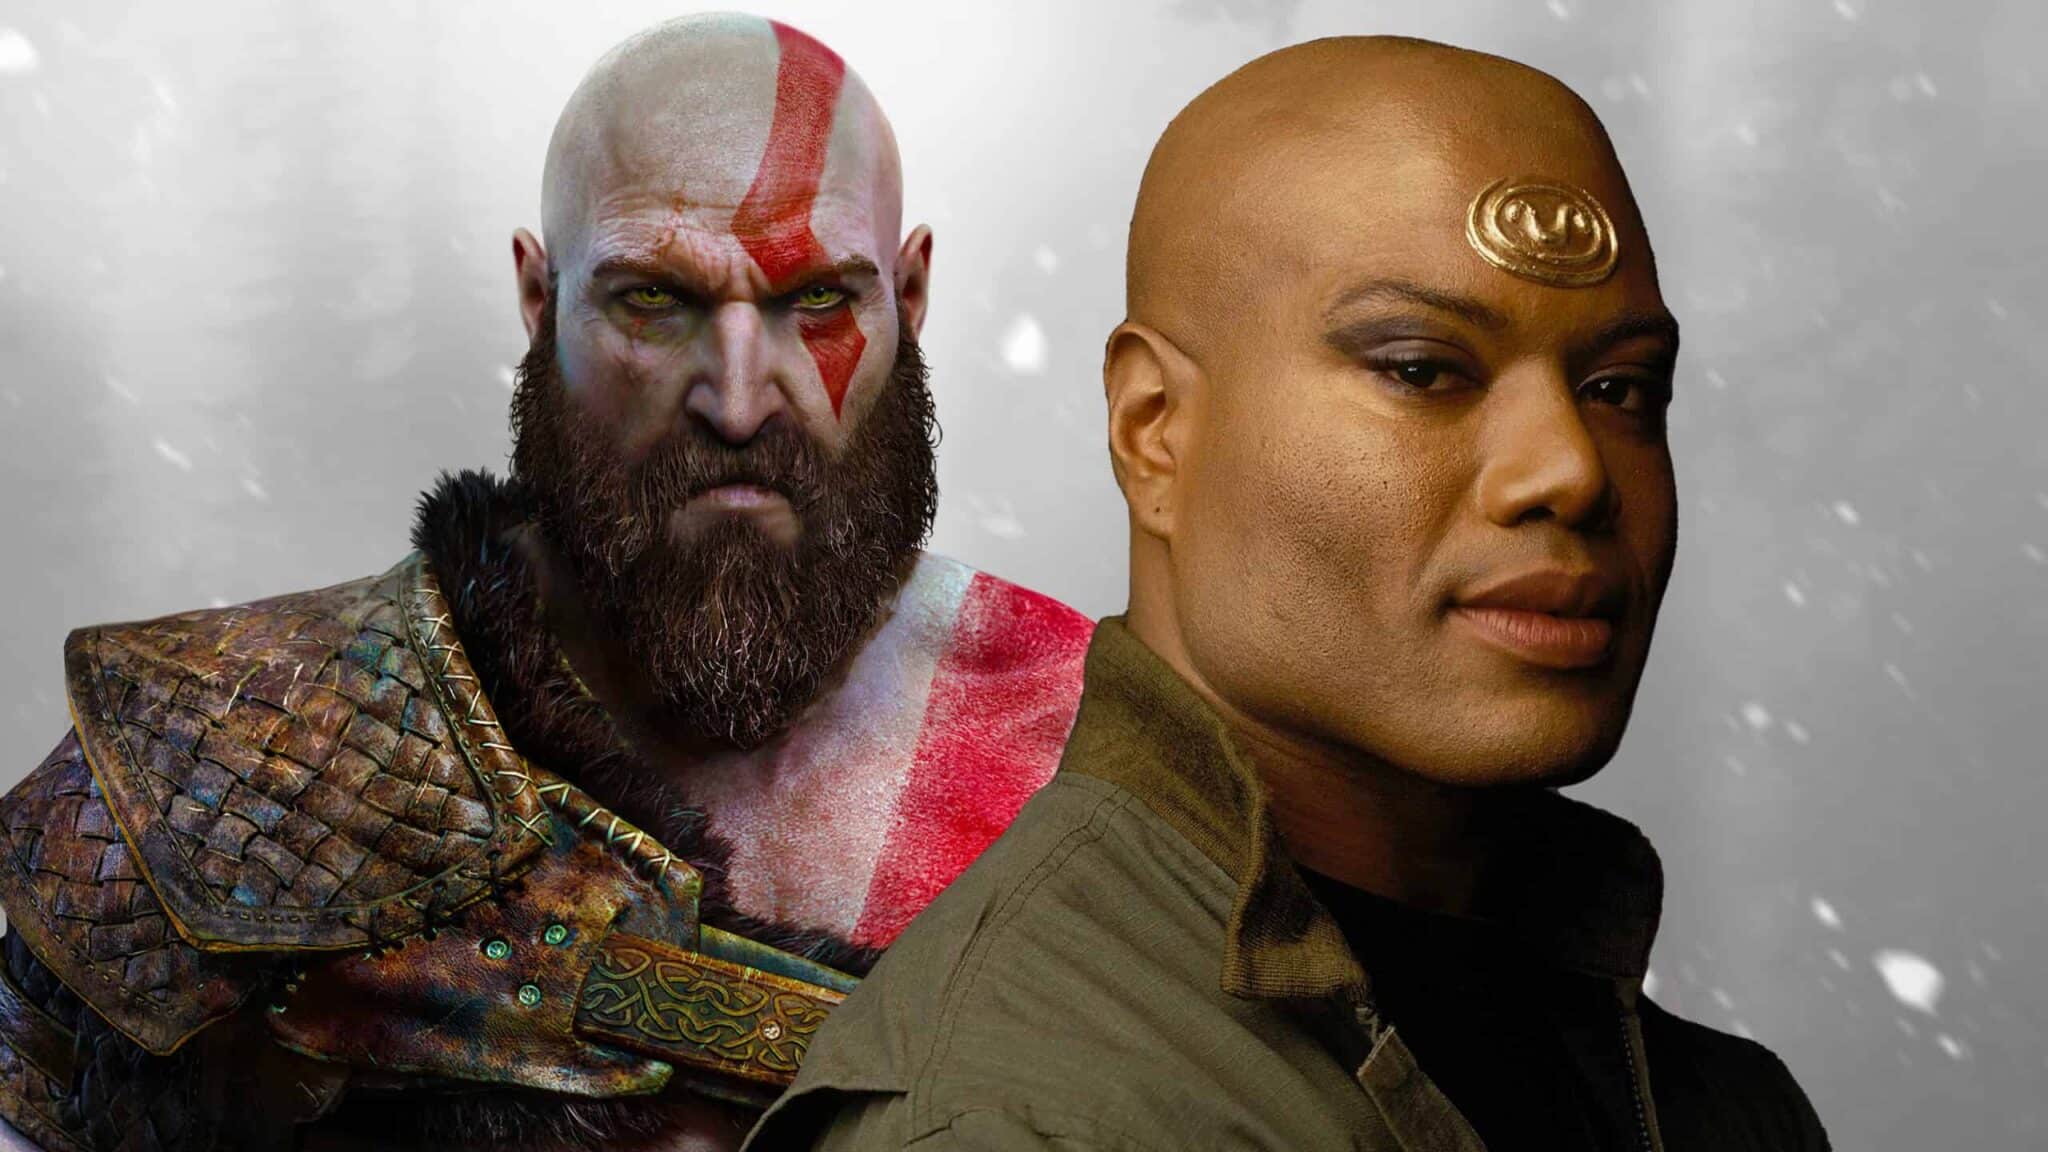 God of War Ragnarok Cast: Every Character and Voice Actor